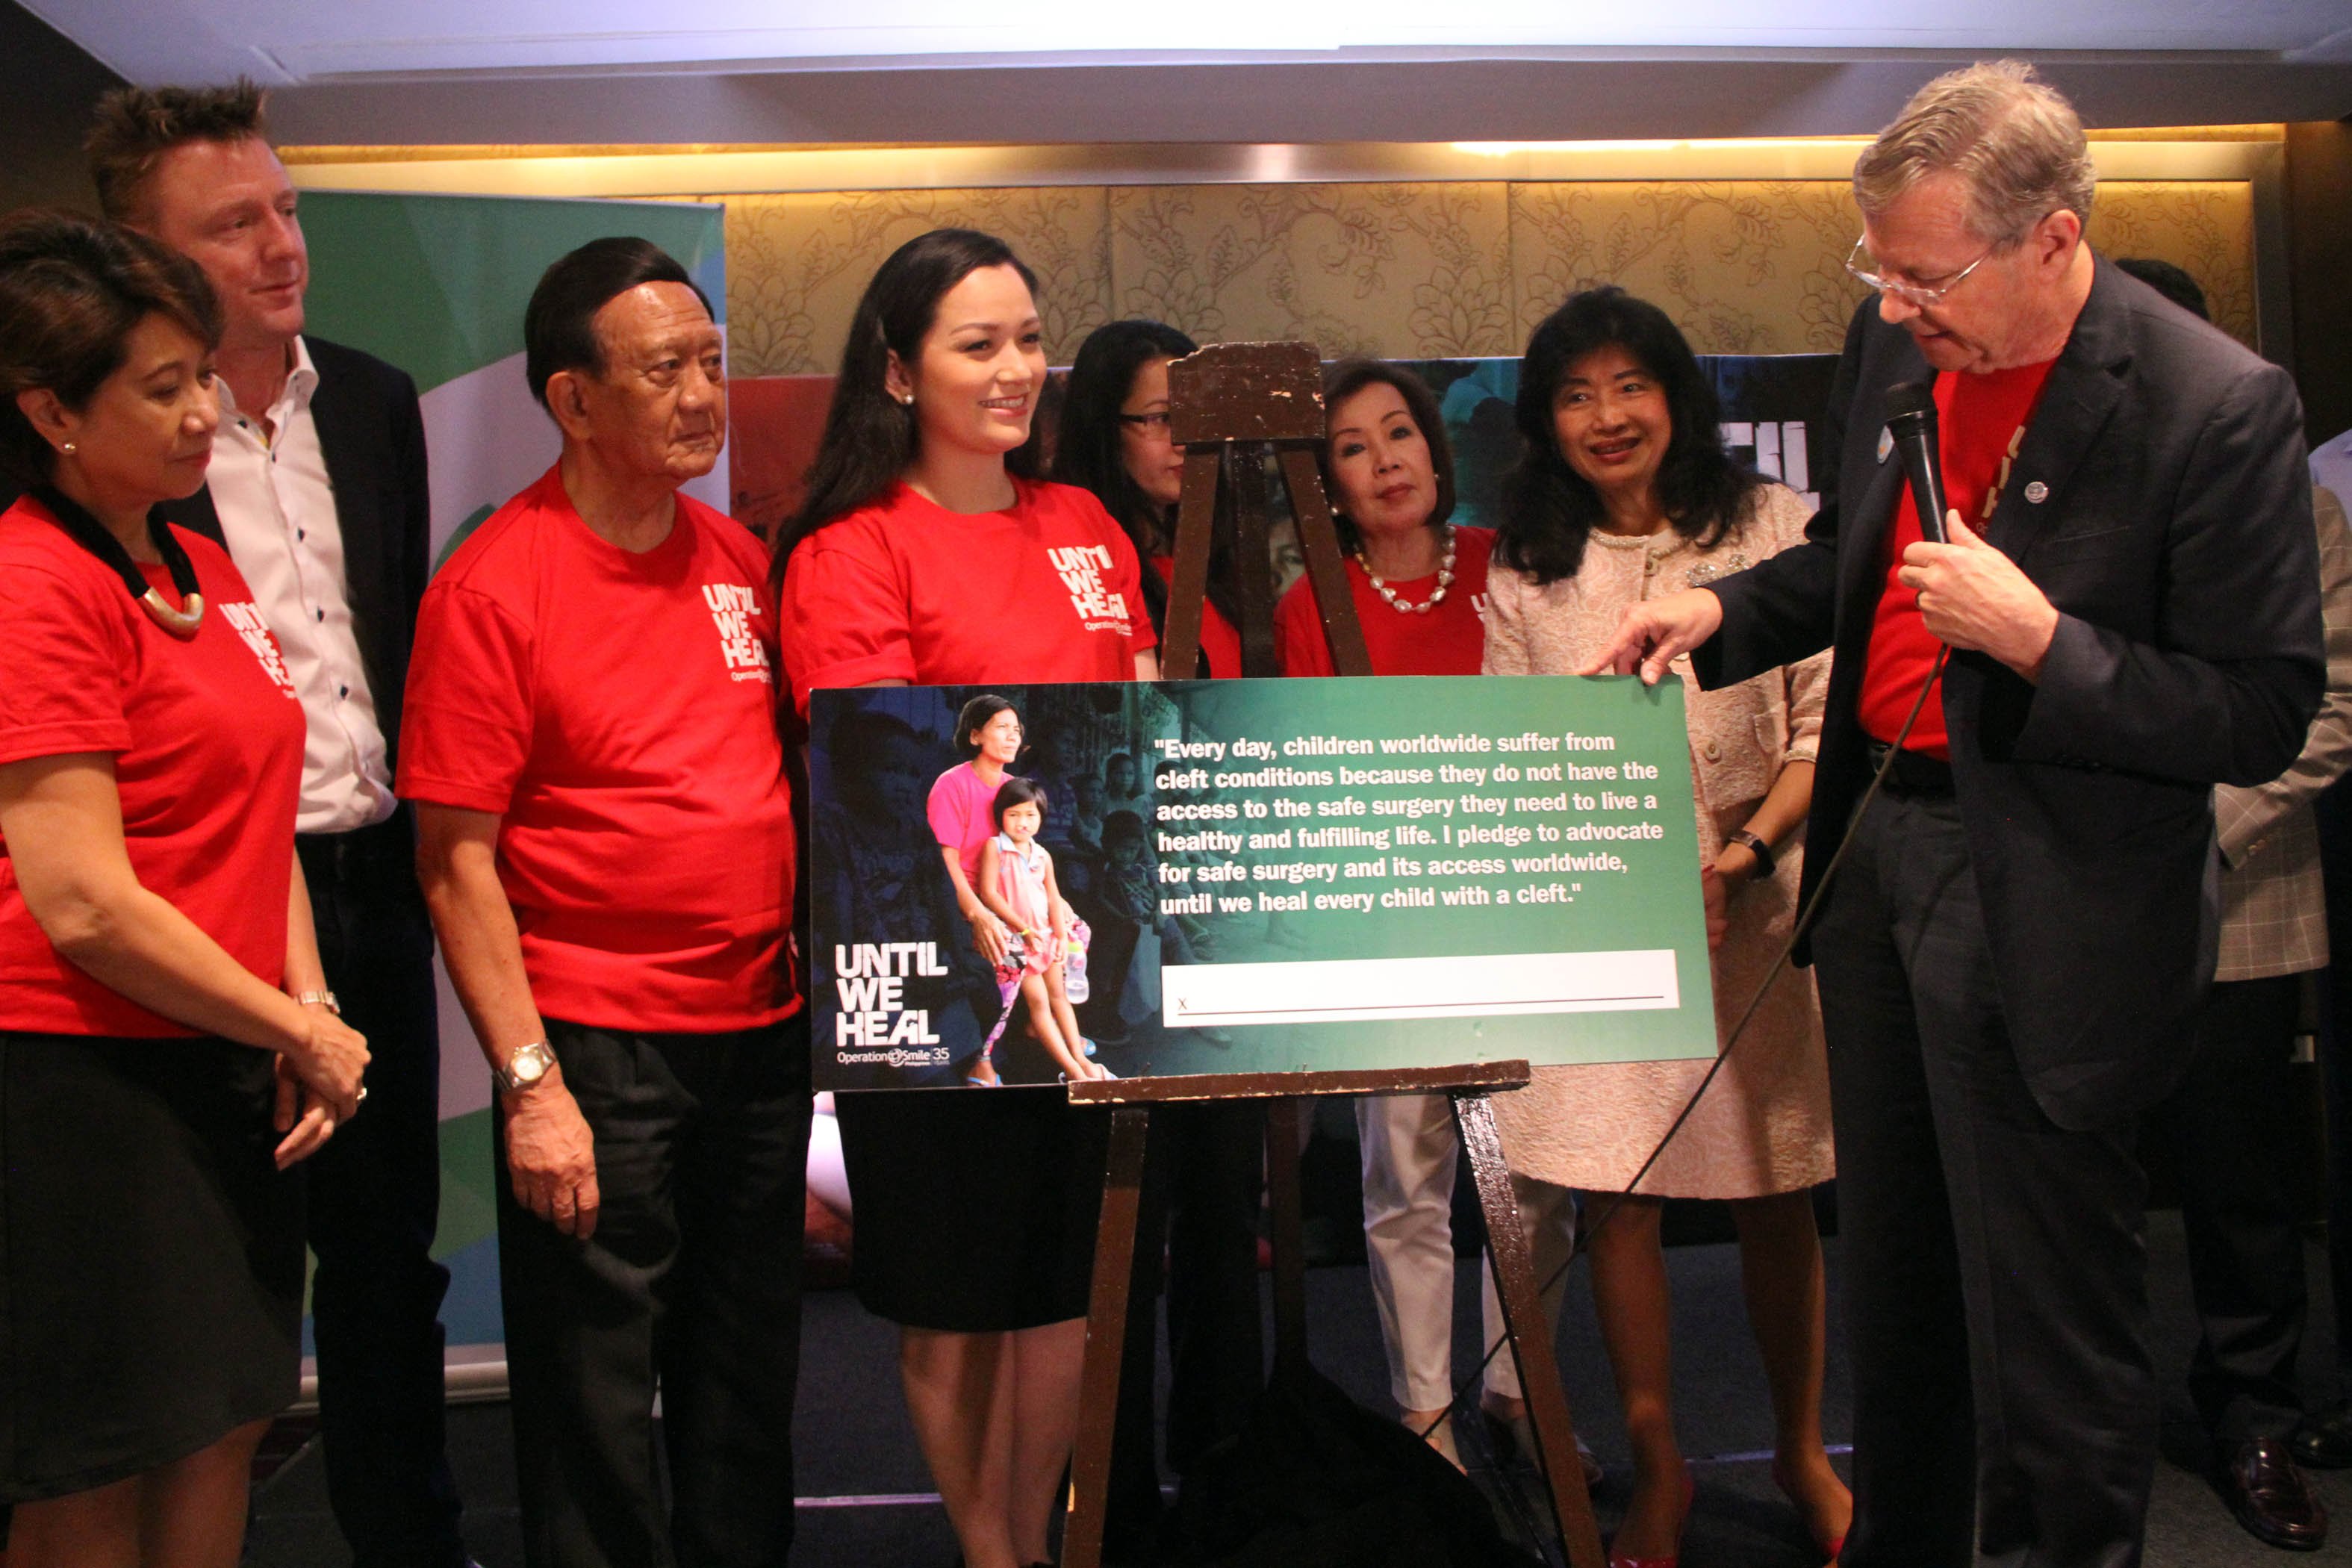 Operation Smile Philippines is 1st to sign 'Until We Heal' pledge